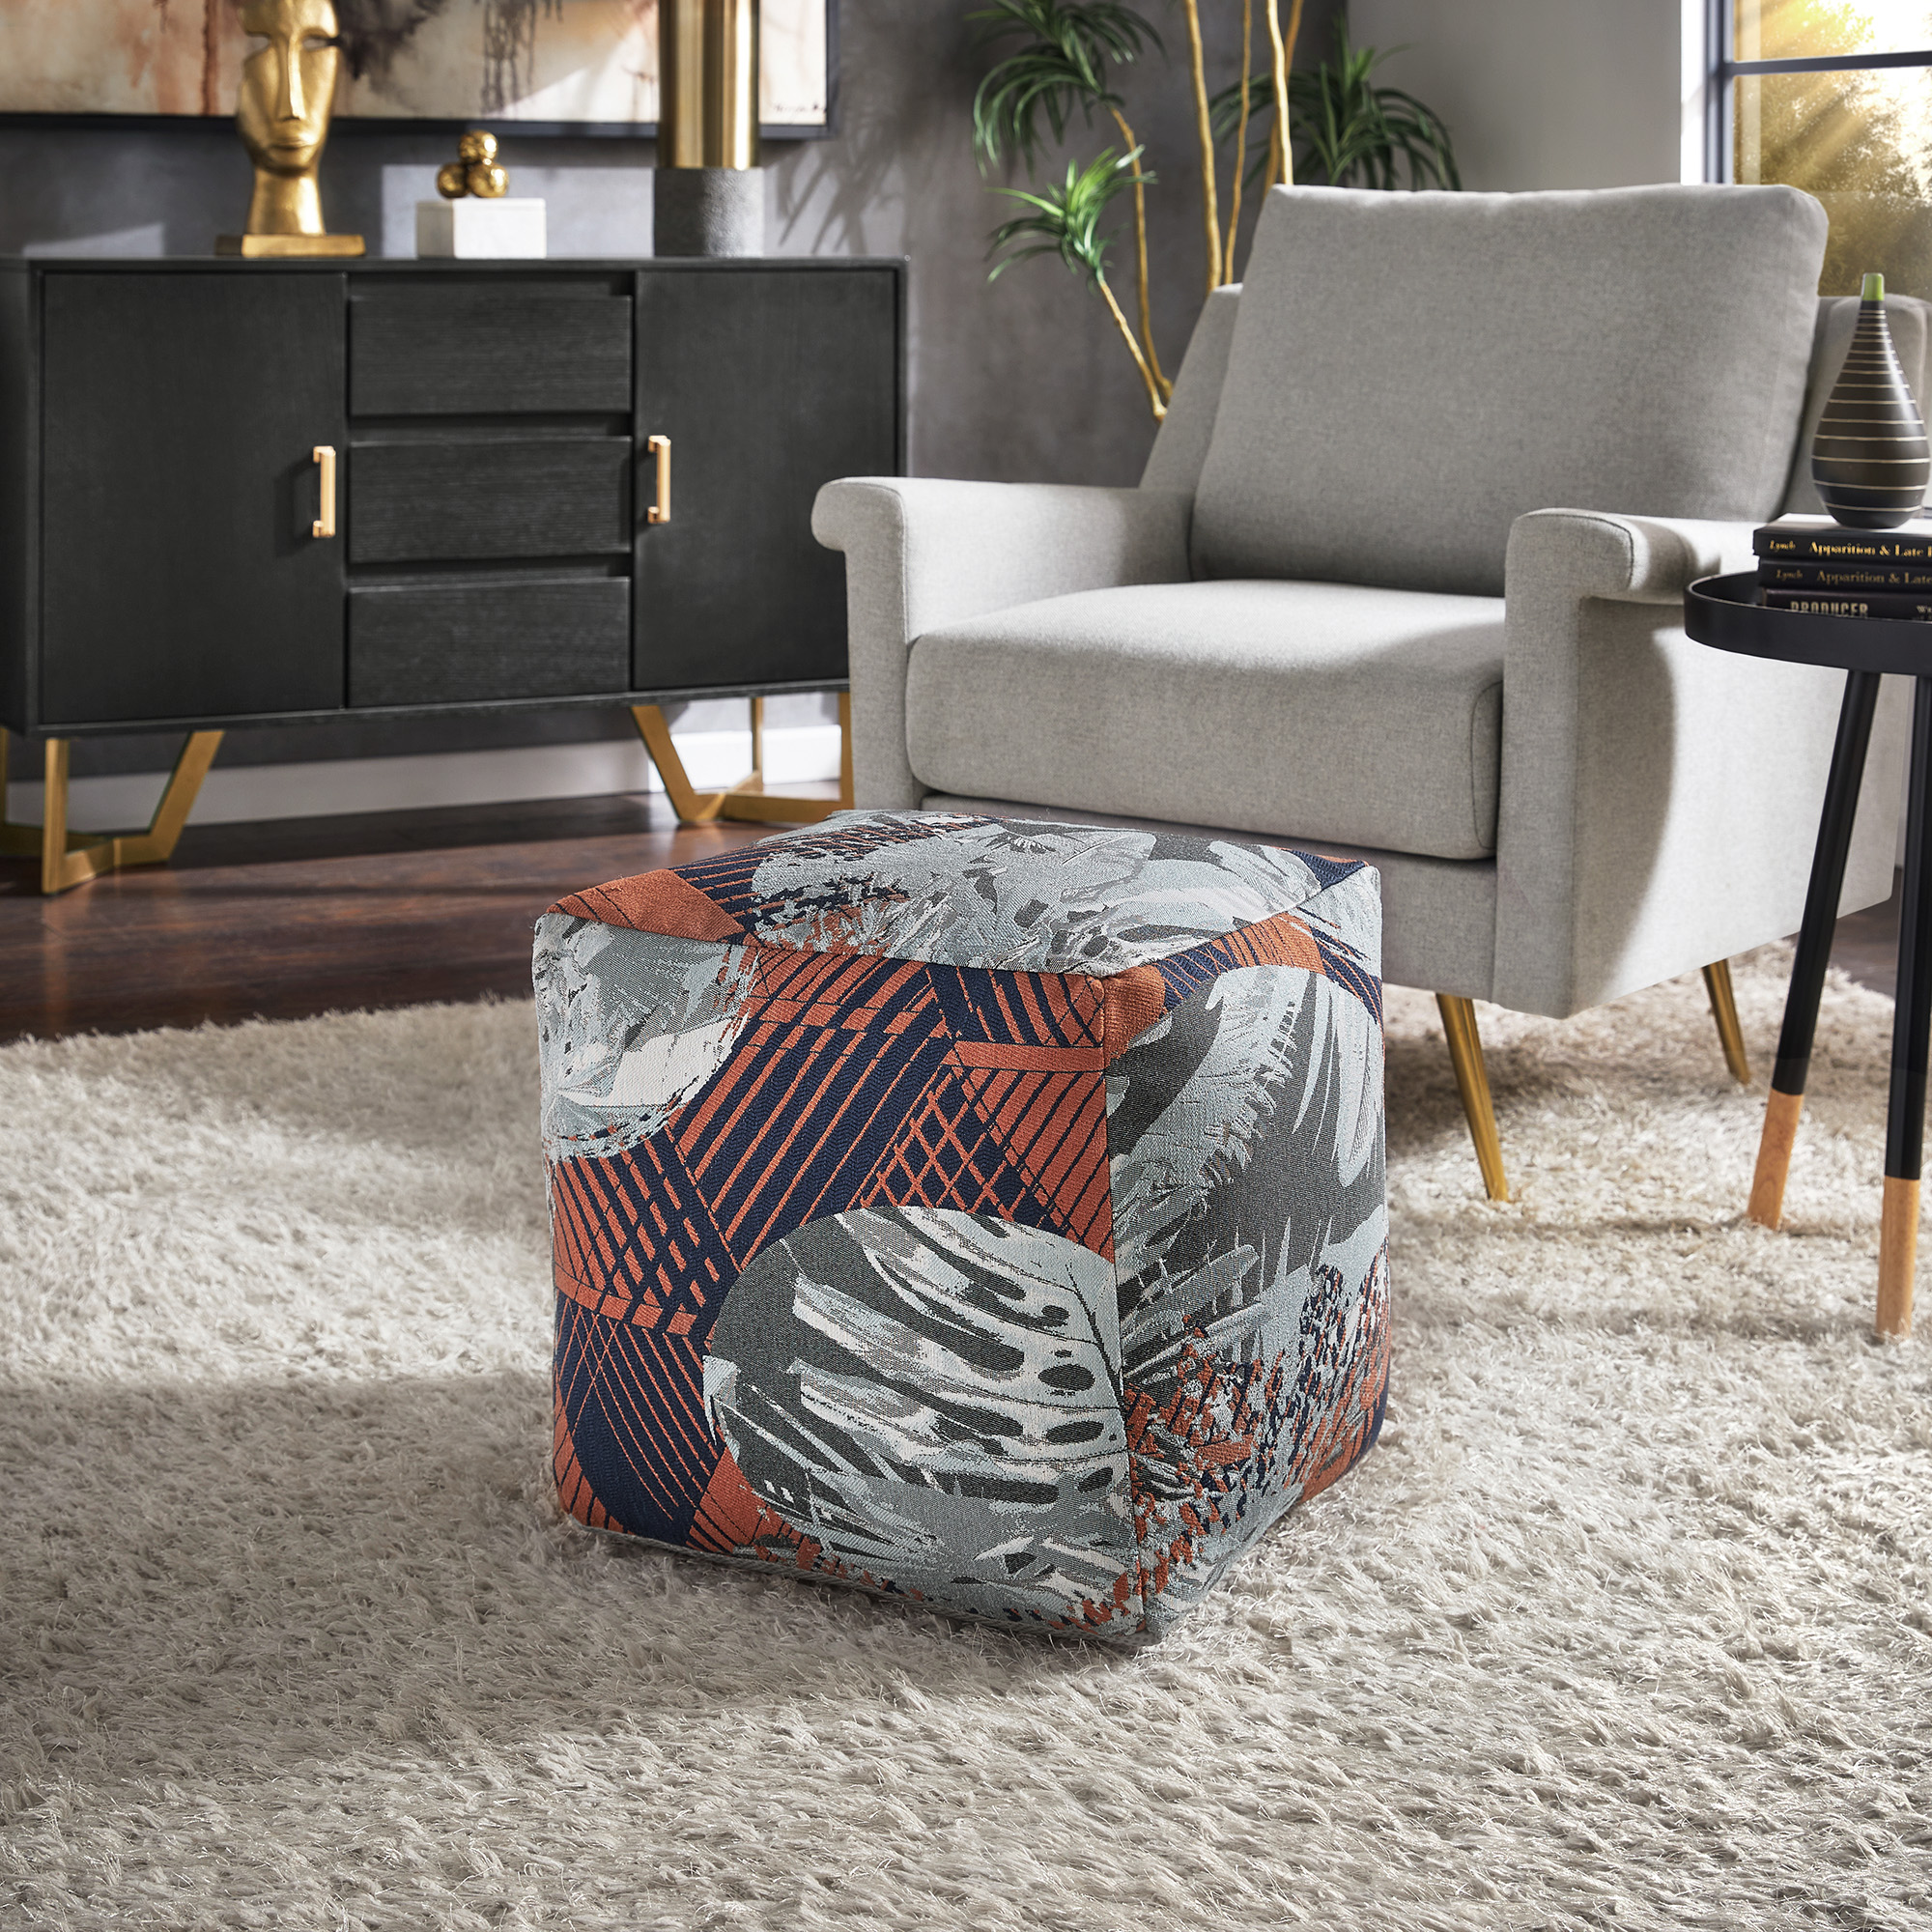 Upholstered Square Pouf Ottoman